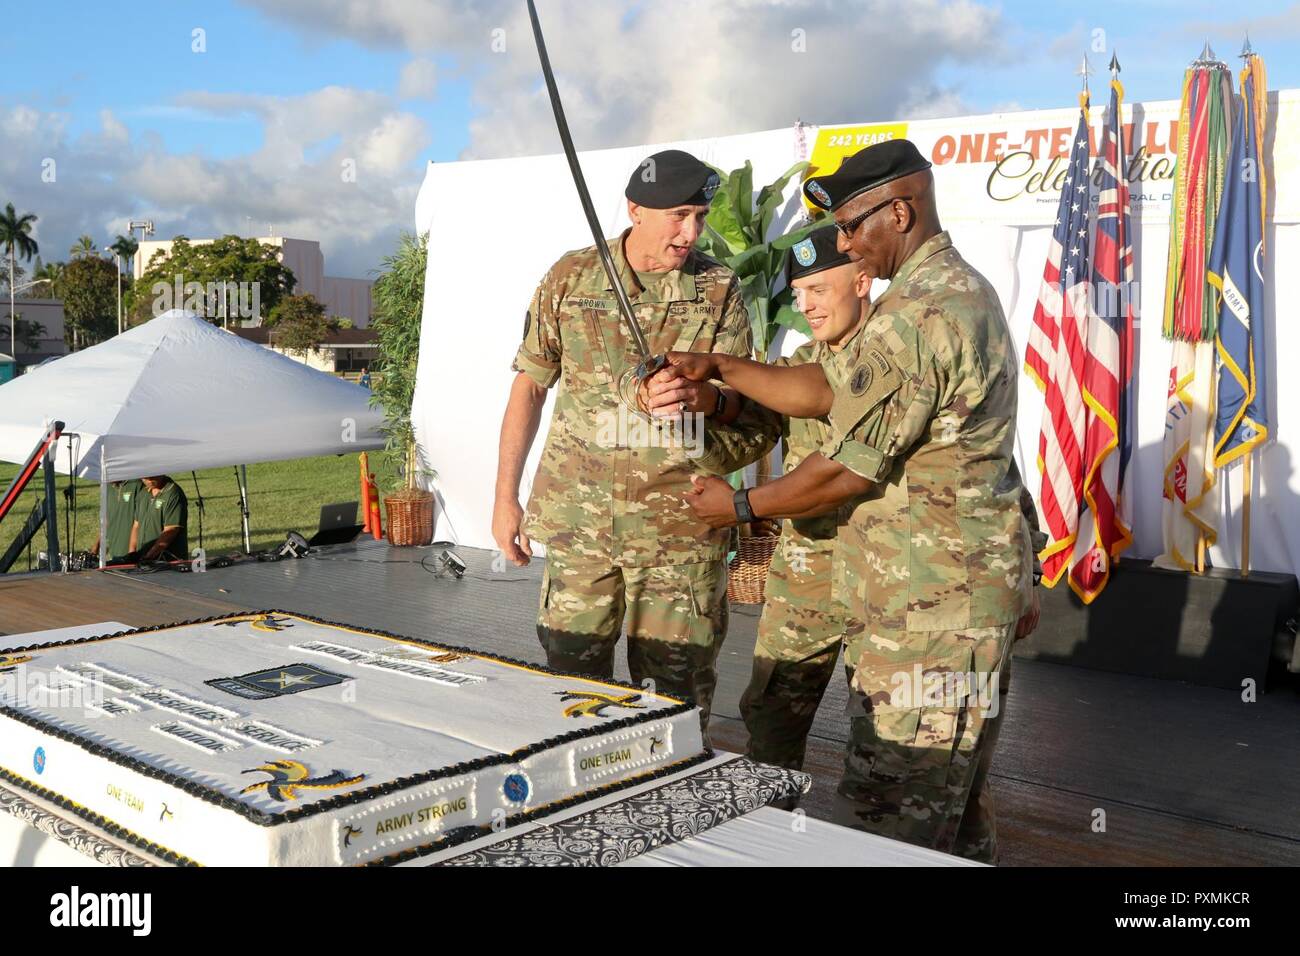 The formal portion of the luau concluded with the traditional cake cutting. Representing the past, present, and future successes of United States Army Pacific was: Gen. Robert B. Brown (left), the command's most senior commissioned officer, who also represented the most senior Army Soldier; Command Sgt. Maj. Bryant Lambert (right), USARPAC's senior enlisted leader; the command's youngest Soldier, Pvt. 1st Class Michael Rankin from the 25th Infantry Division. USARHAW and USARPAC celebrated the Army’s birthday with a luau instead of the more traditional ball. The luau was a fun way of getting So Stock Photo